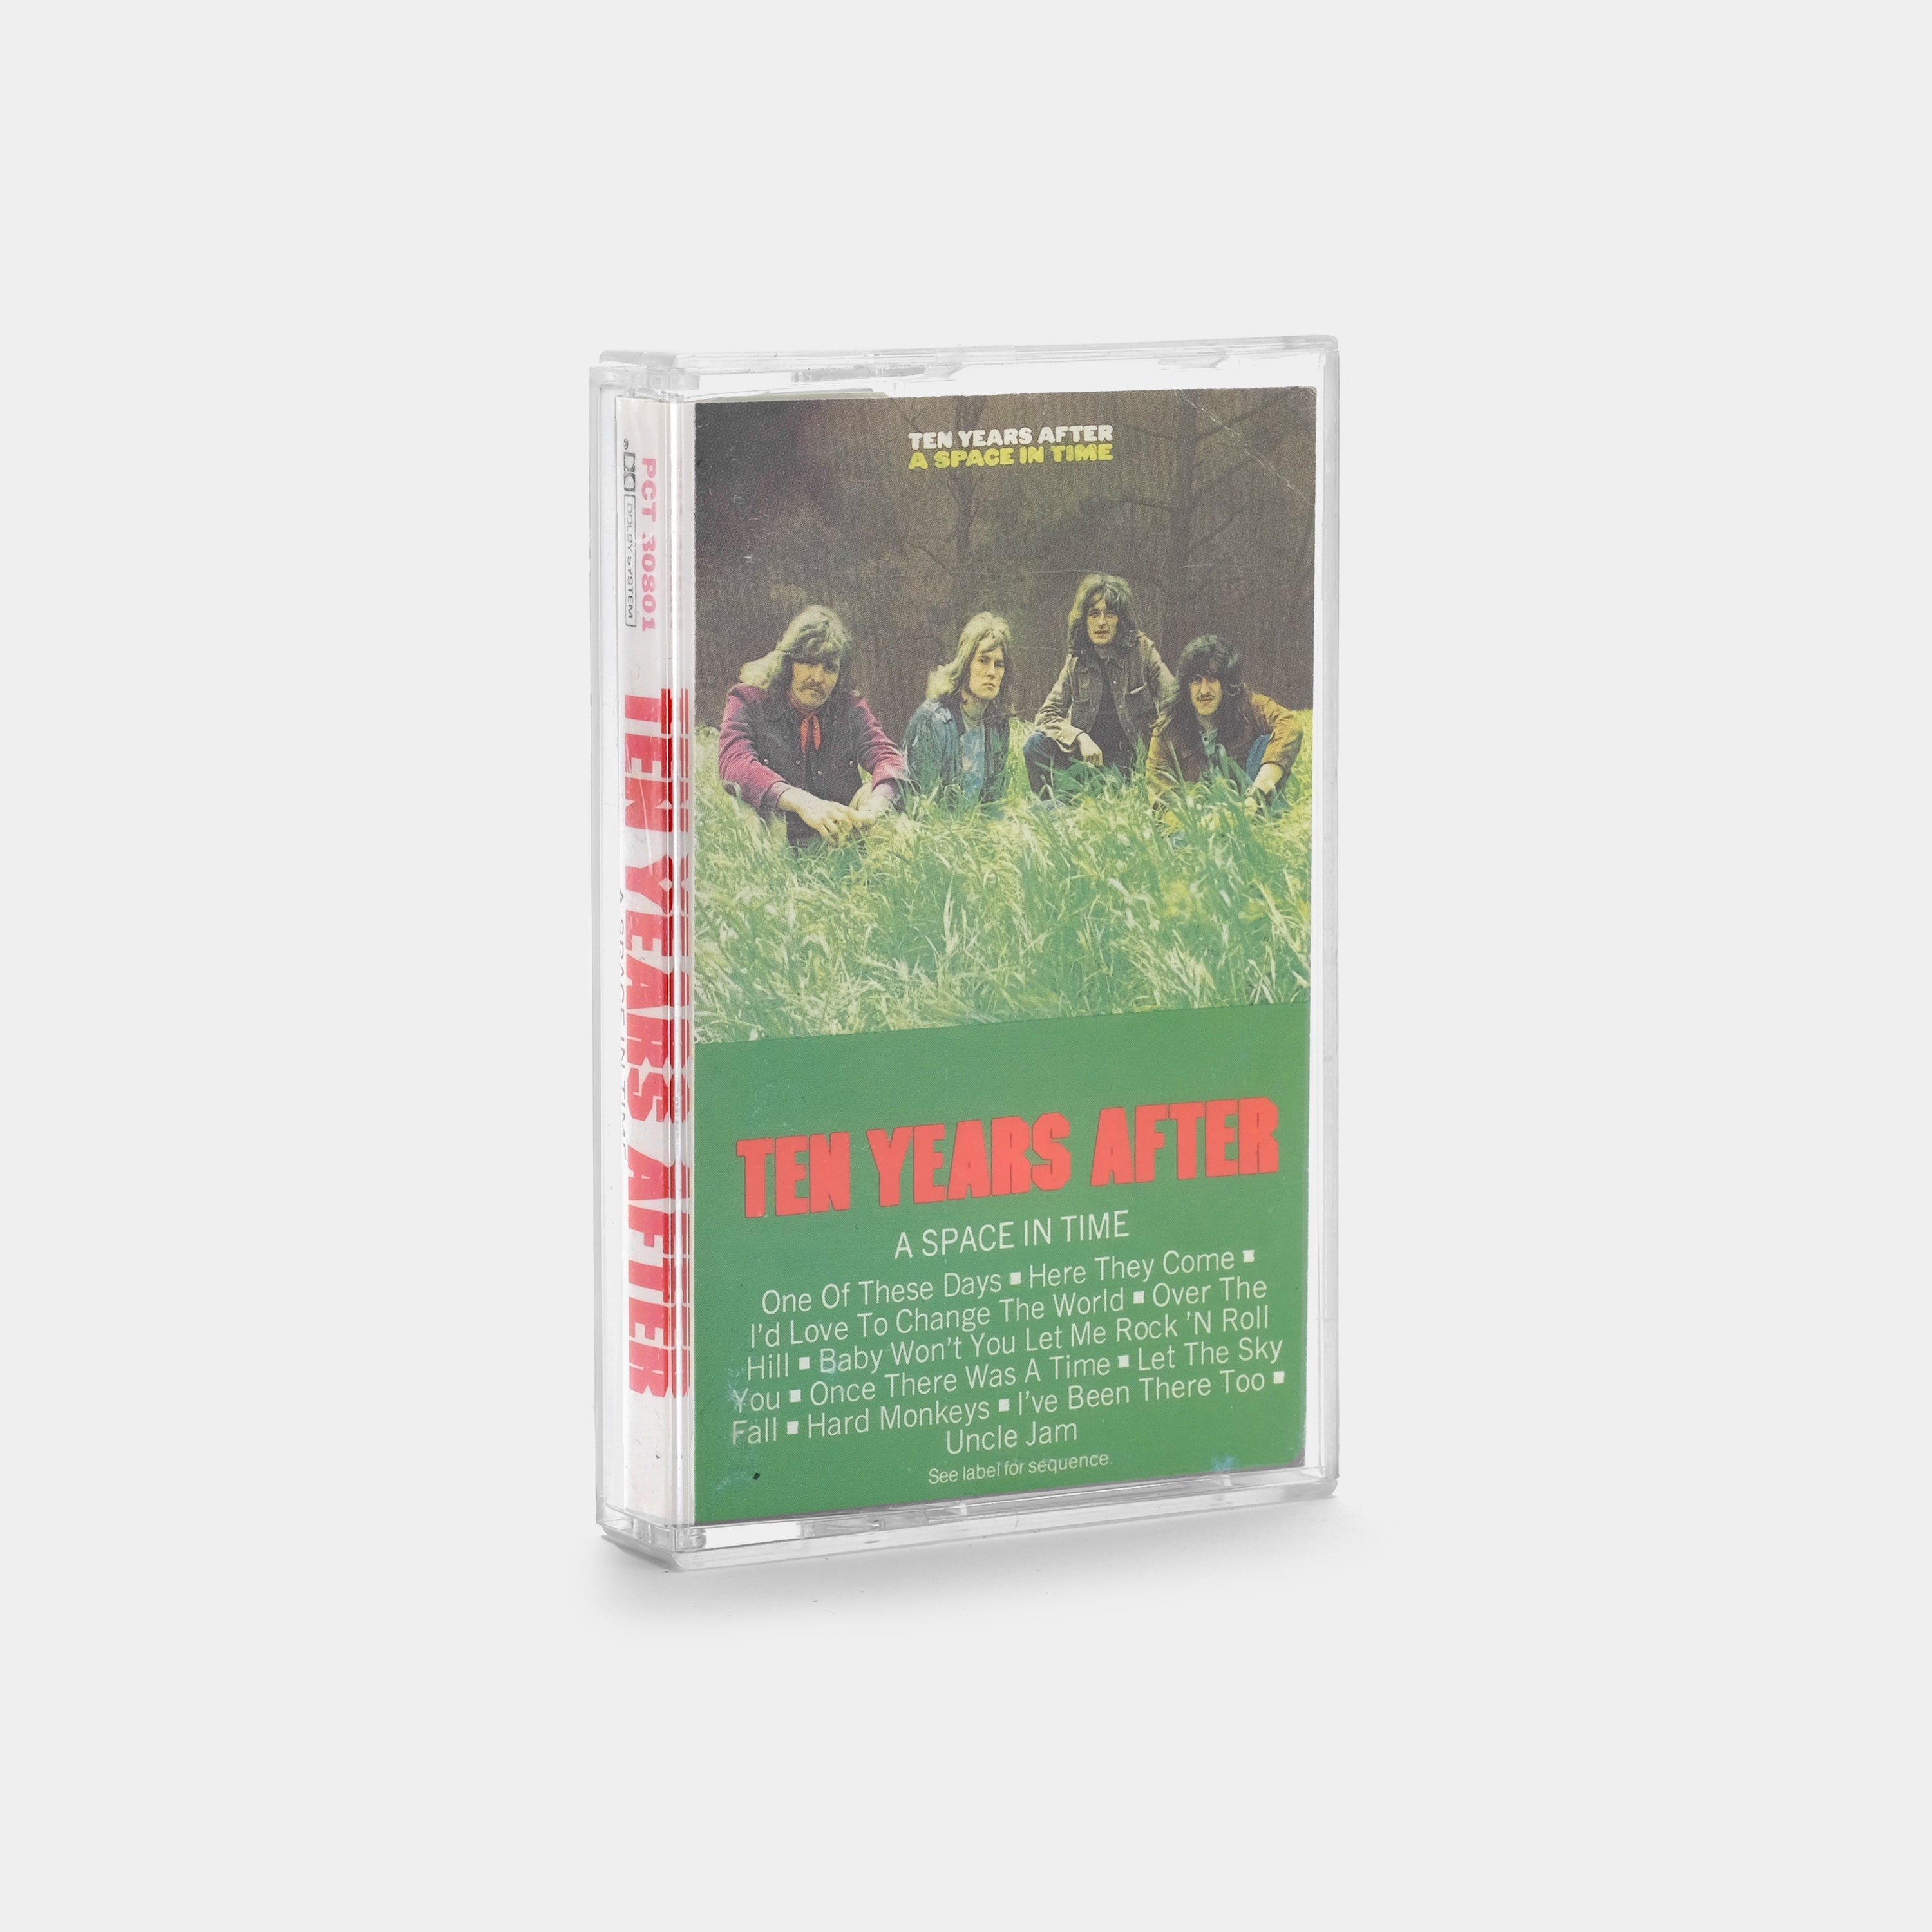 Ten Years After - A Space In Time Cassette Tape